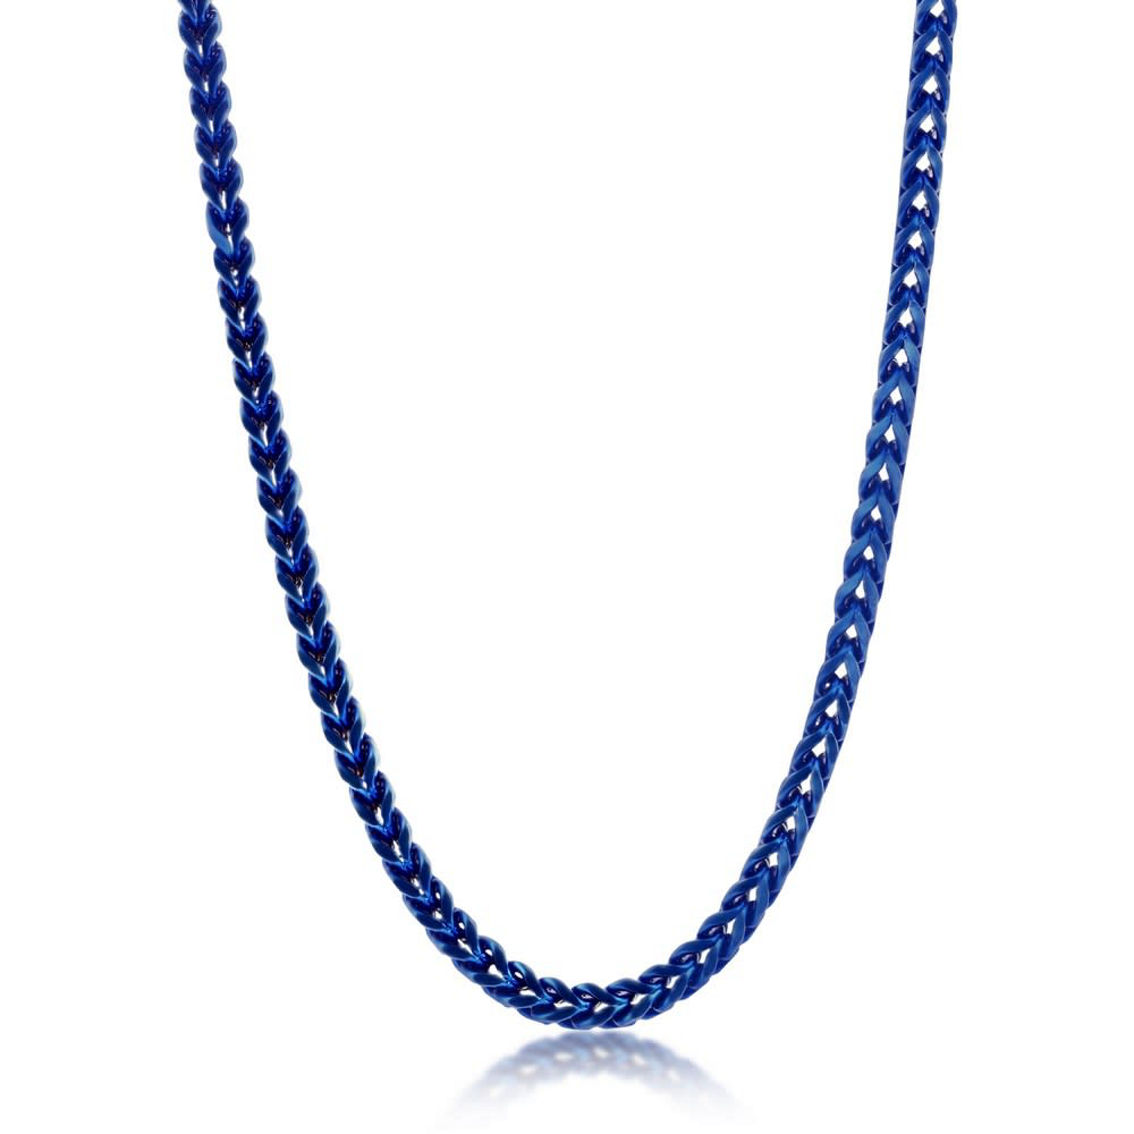 Metallo Stainless Steel 4mm Franco Chain Necklace - Image 1 of 2